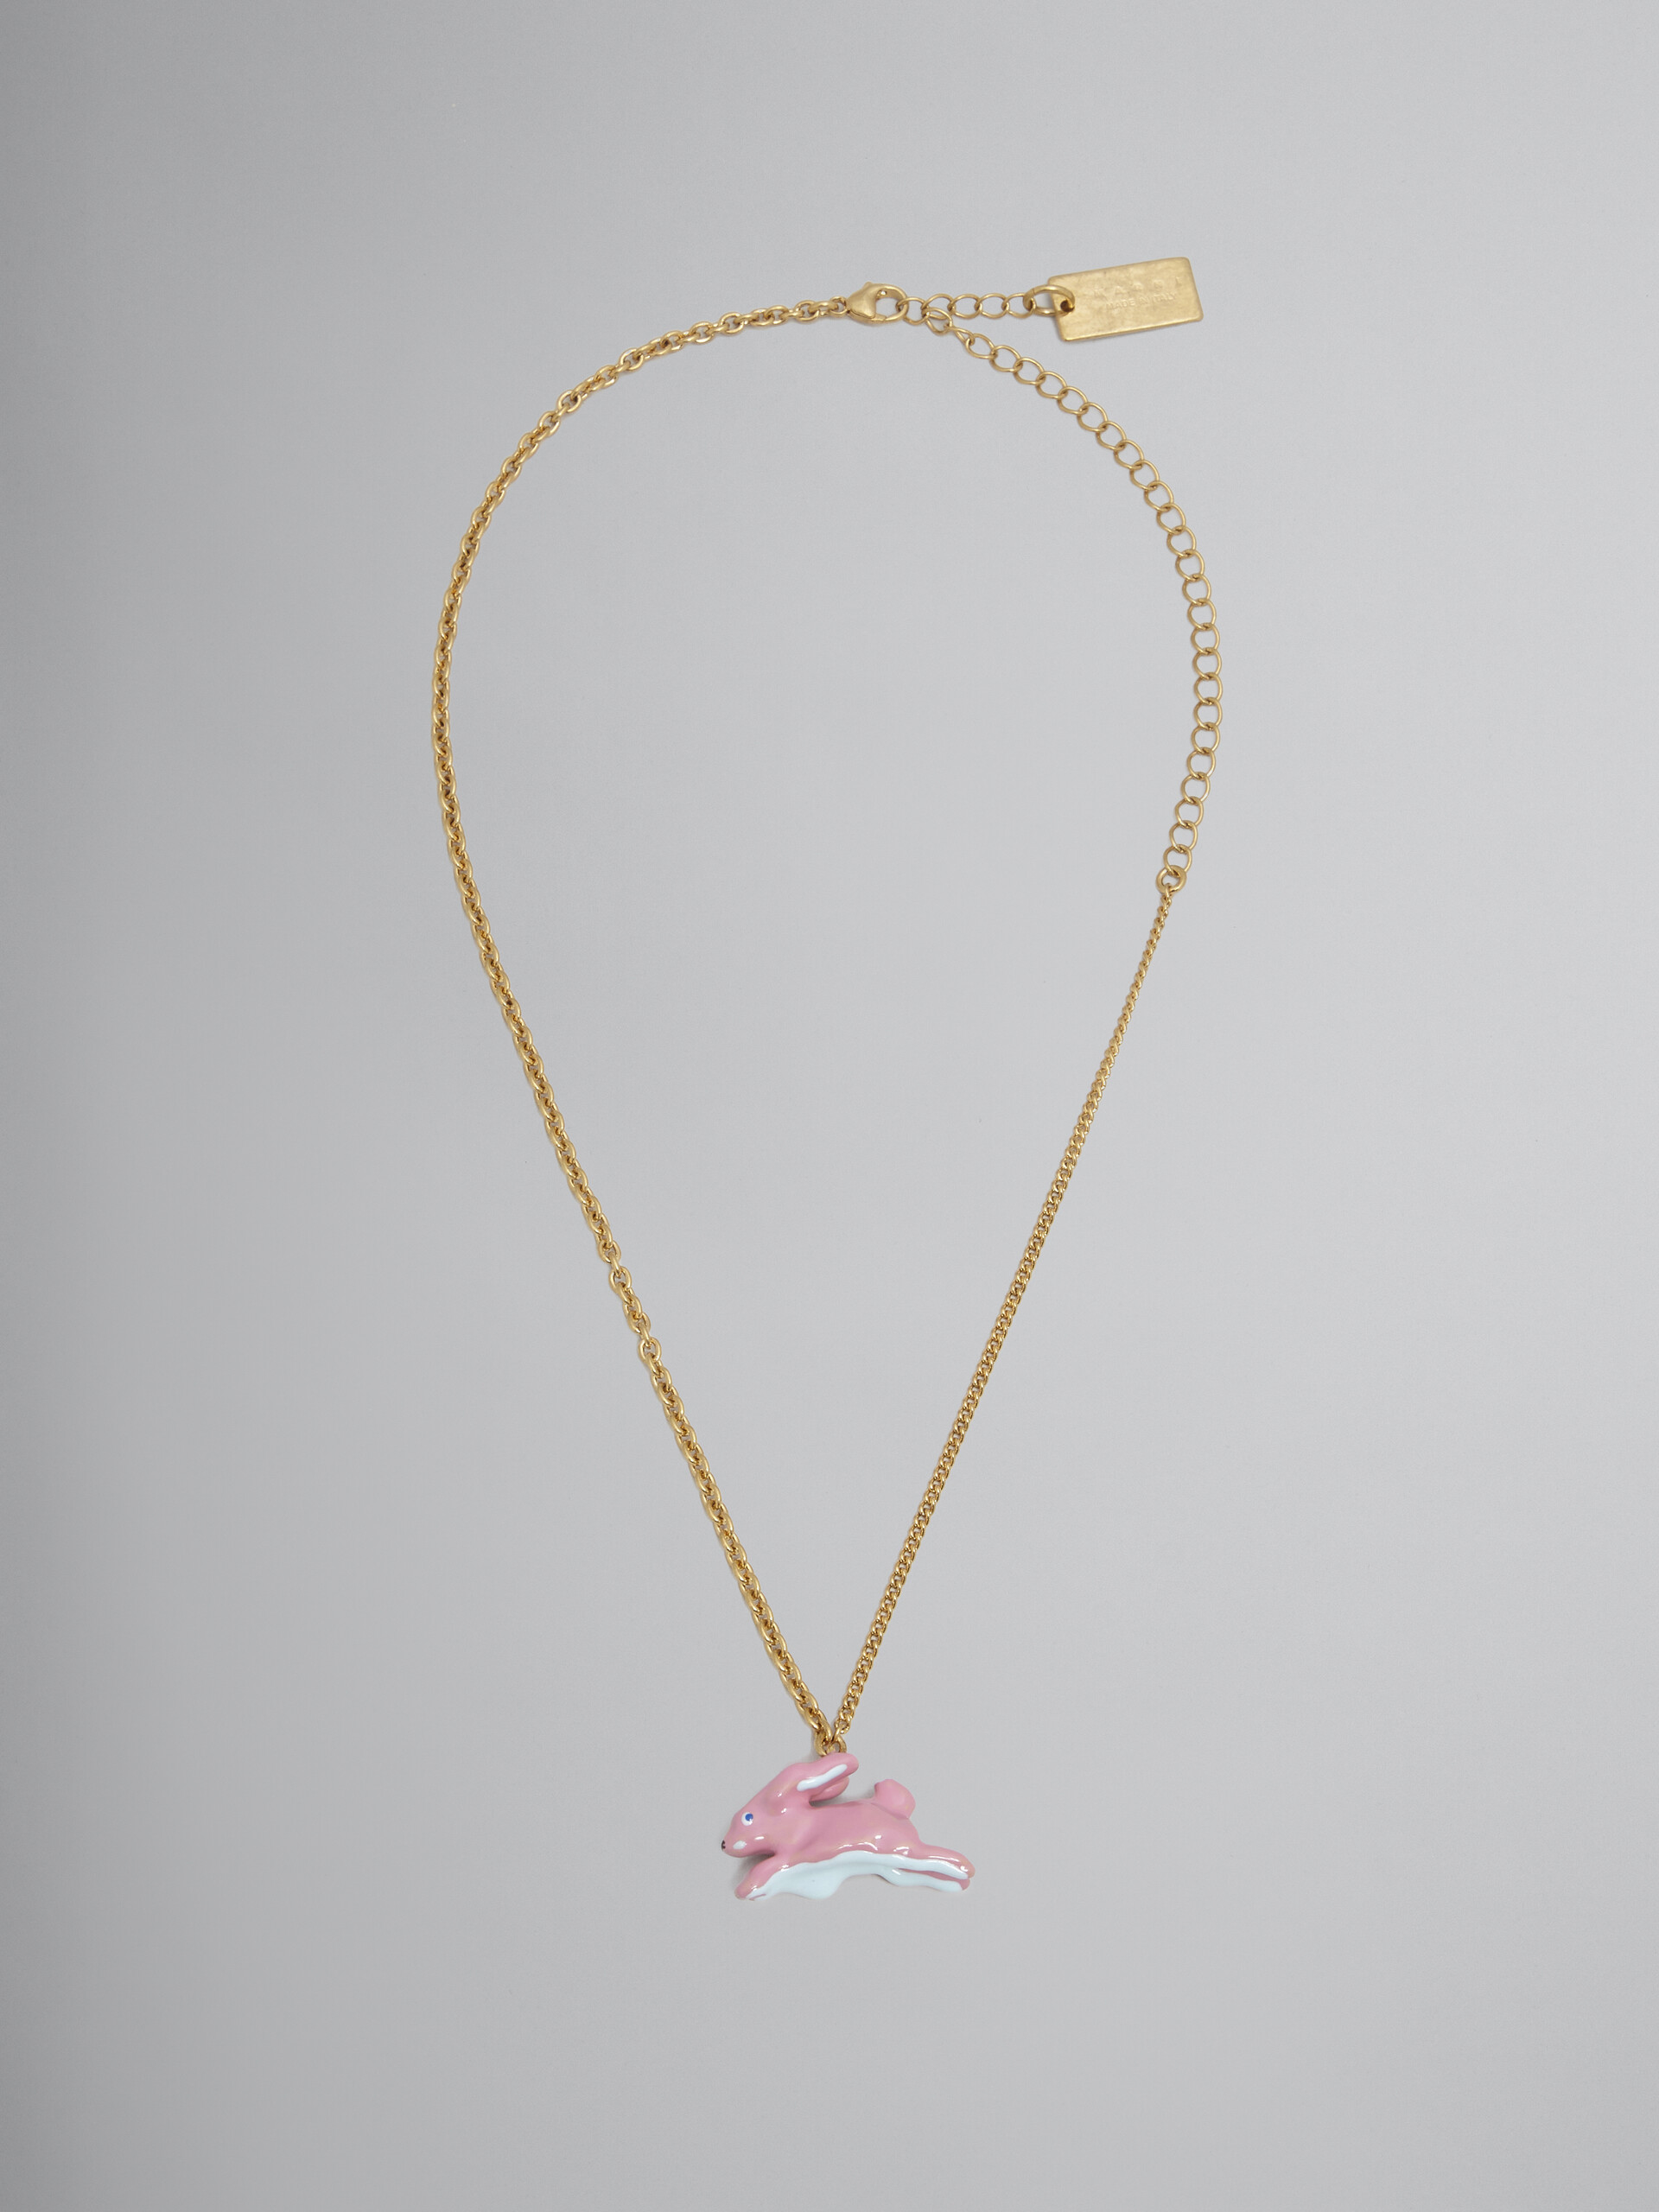 Necklace with rabbit pendant - Necklaces - Image 1